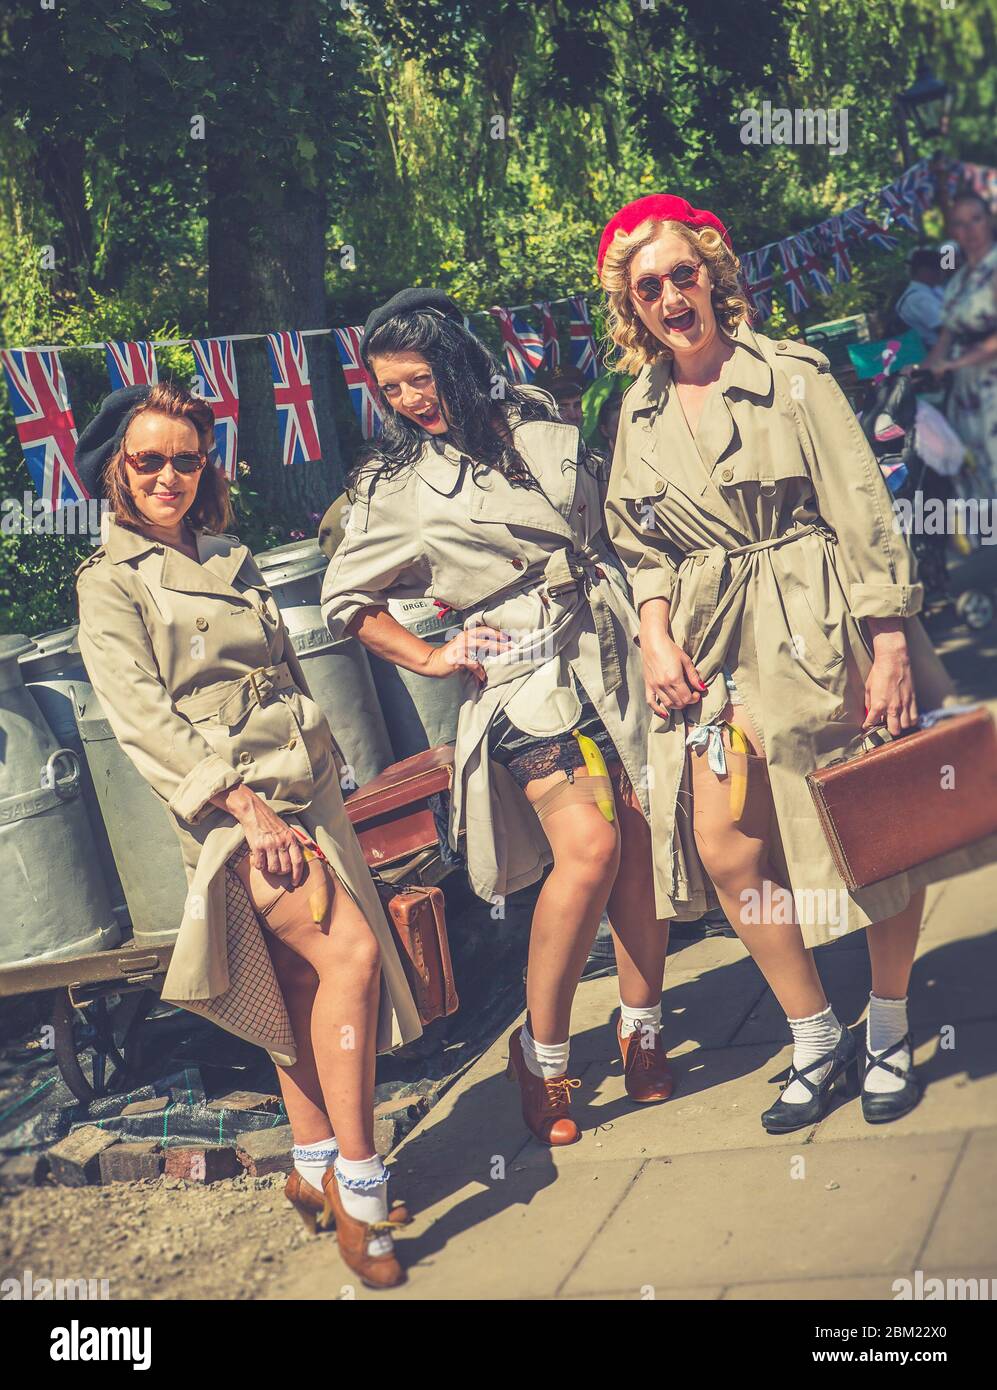 Retro view of 1940s women re-enactors having fun as ladies of the French Resistance from 'Allo 'Allo TV show, Severn Valley Railway WW2  summer event. Stock Photo